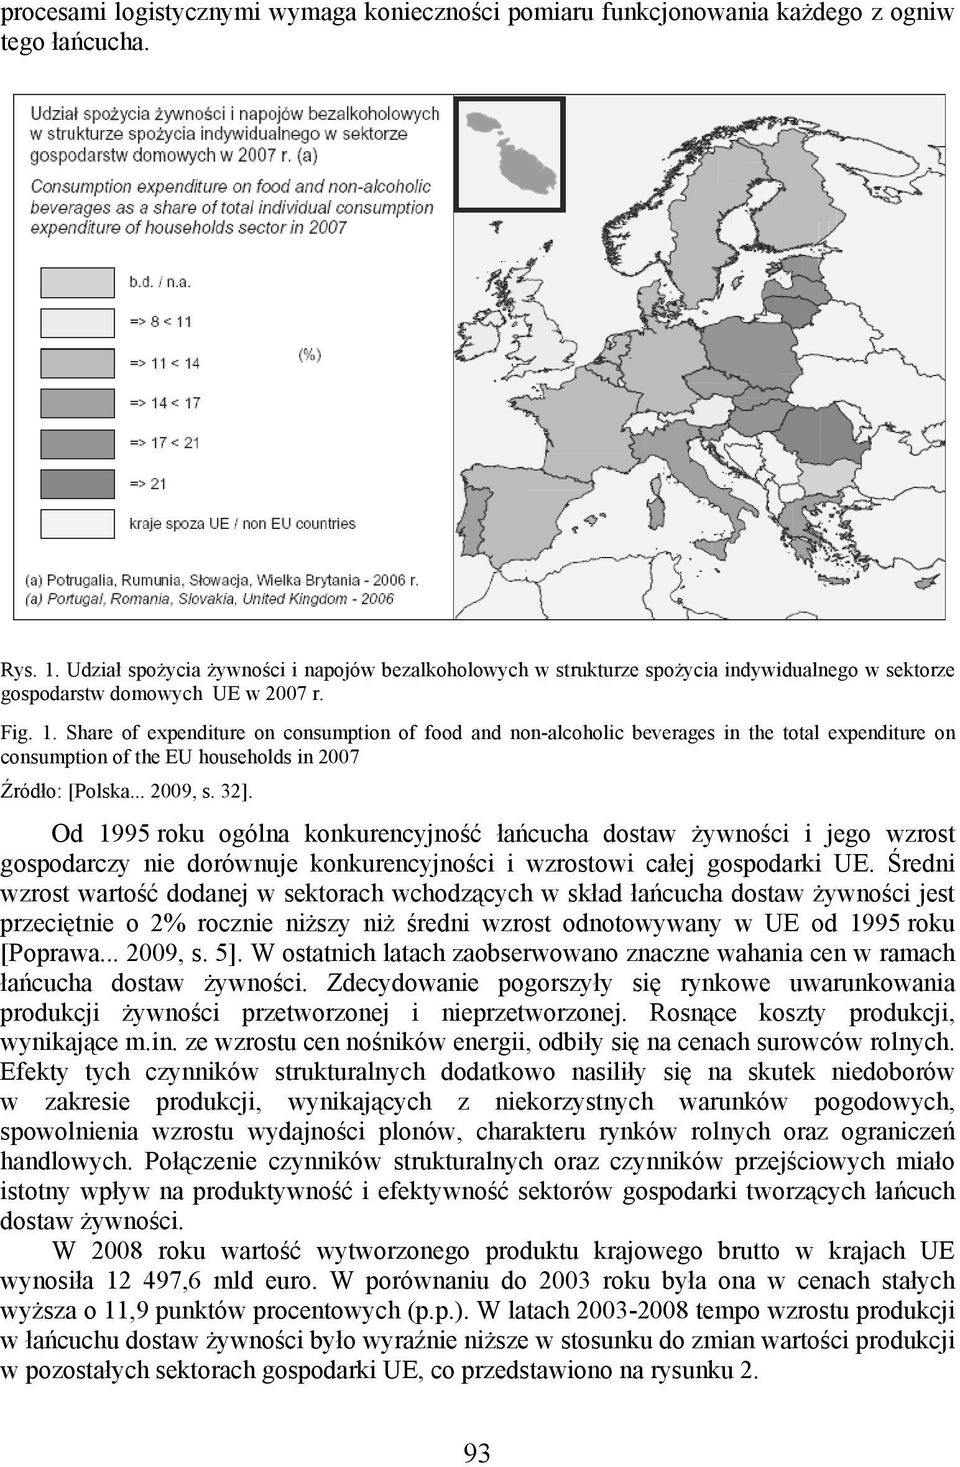 Share of expenditure on consumption of food and non-alcoholic beverages in the total expenditure on consumption of the EU households in 2007 Źródło: [Polska... 2009, s. 32].